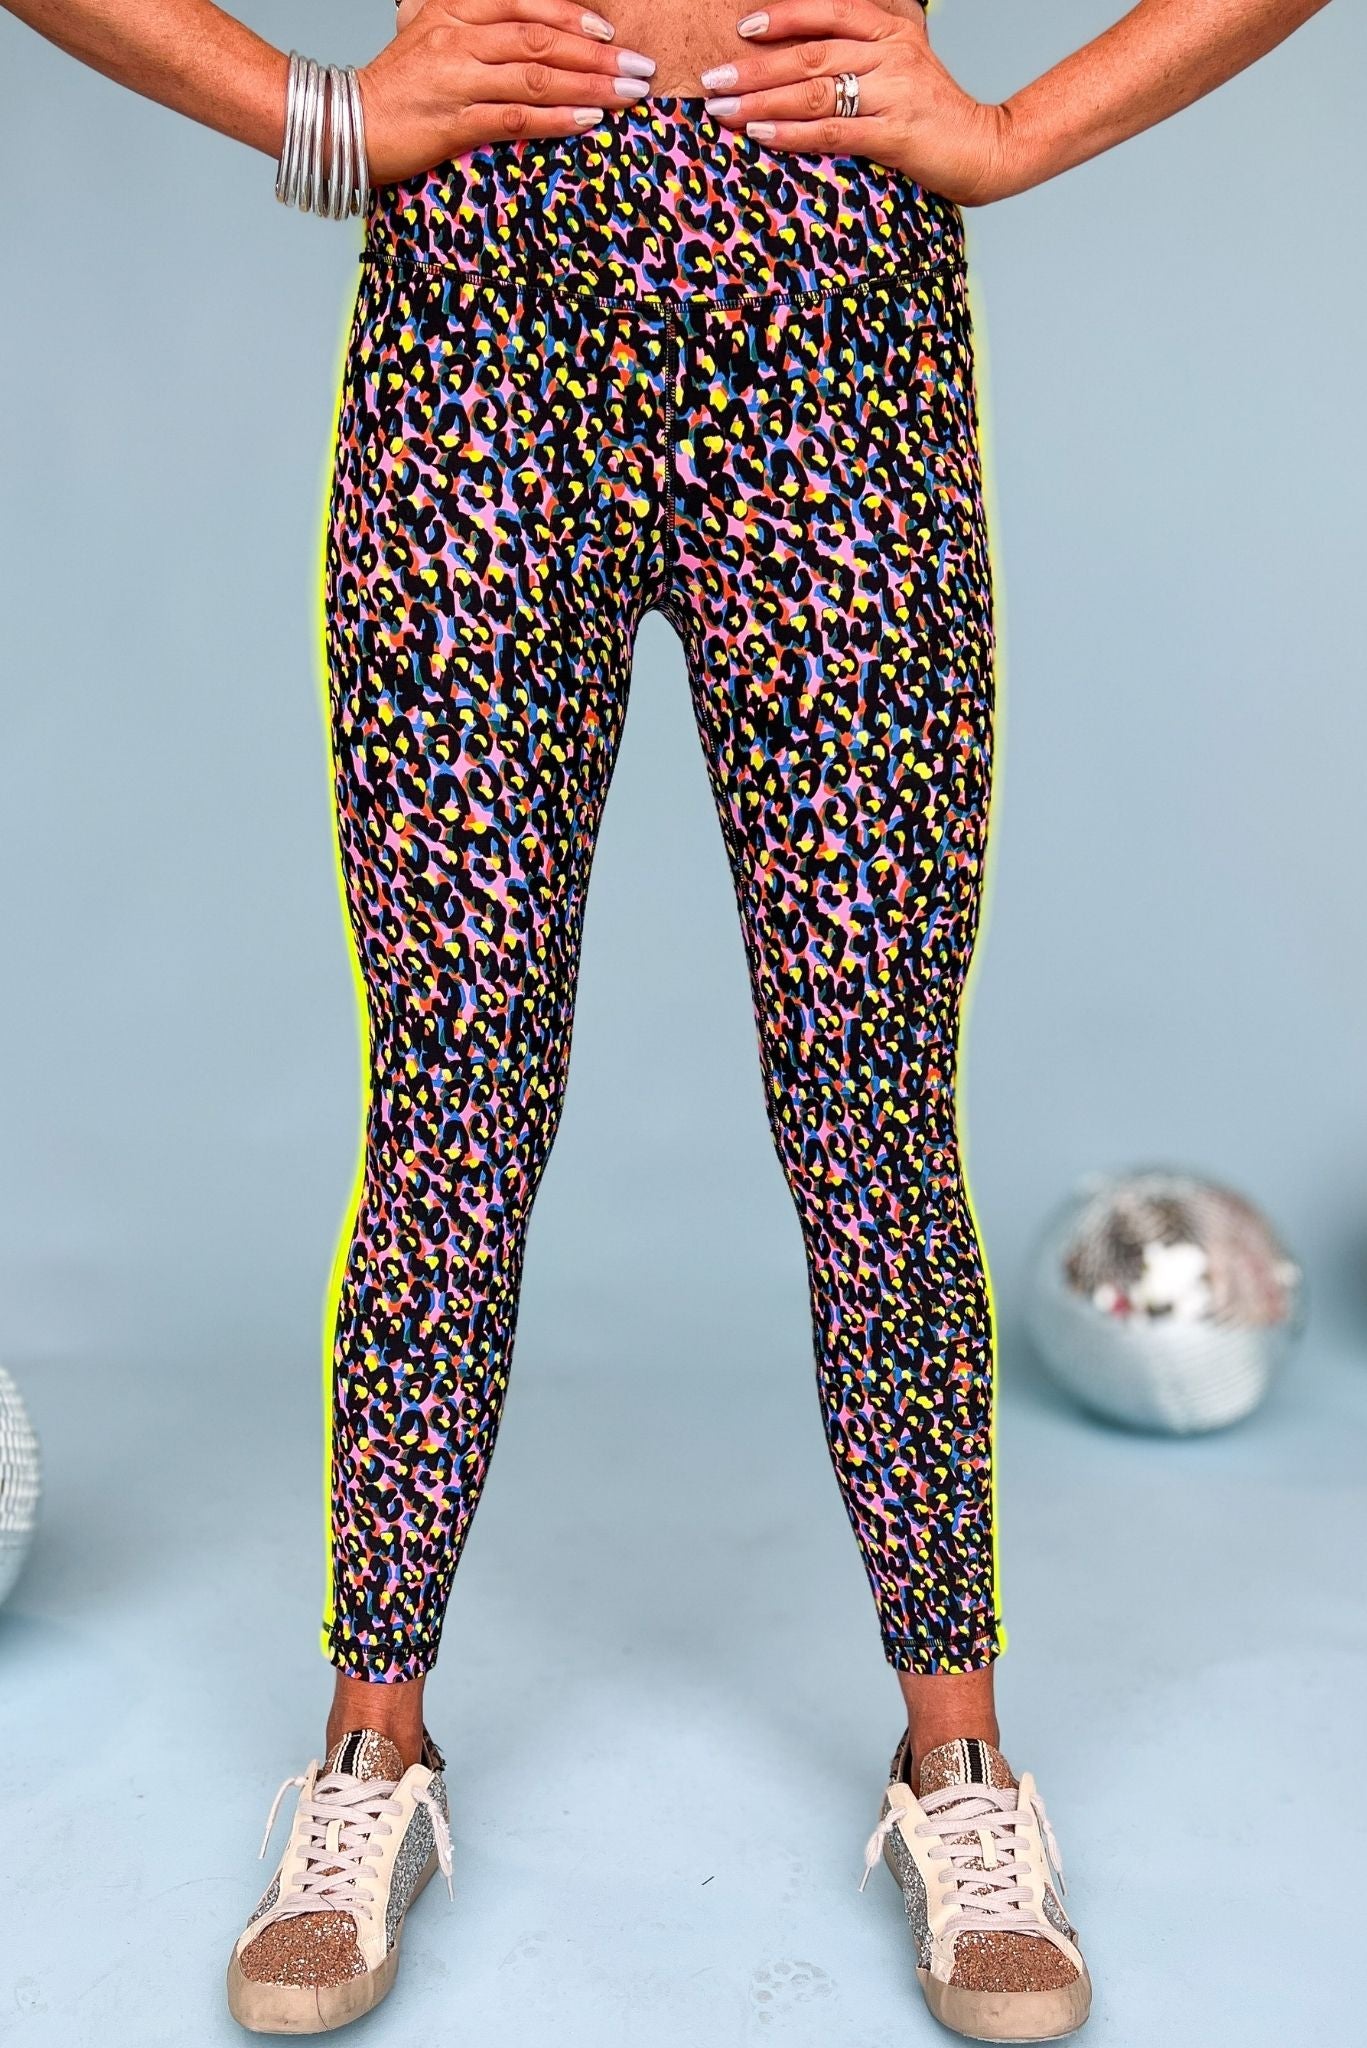 Neon Animal Print Leggings With Neon Stripes, fall fashion, must have, layered look, elevated look, mom style, shop style your senses by mallory fitzsimmons